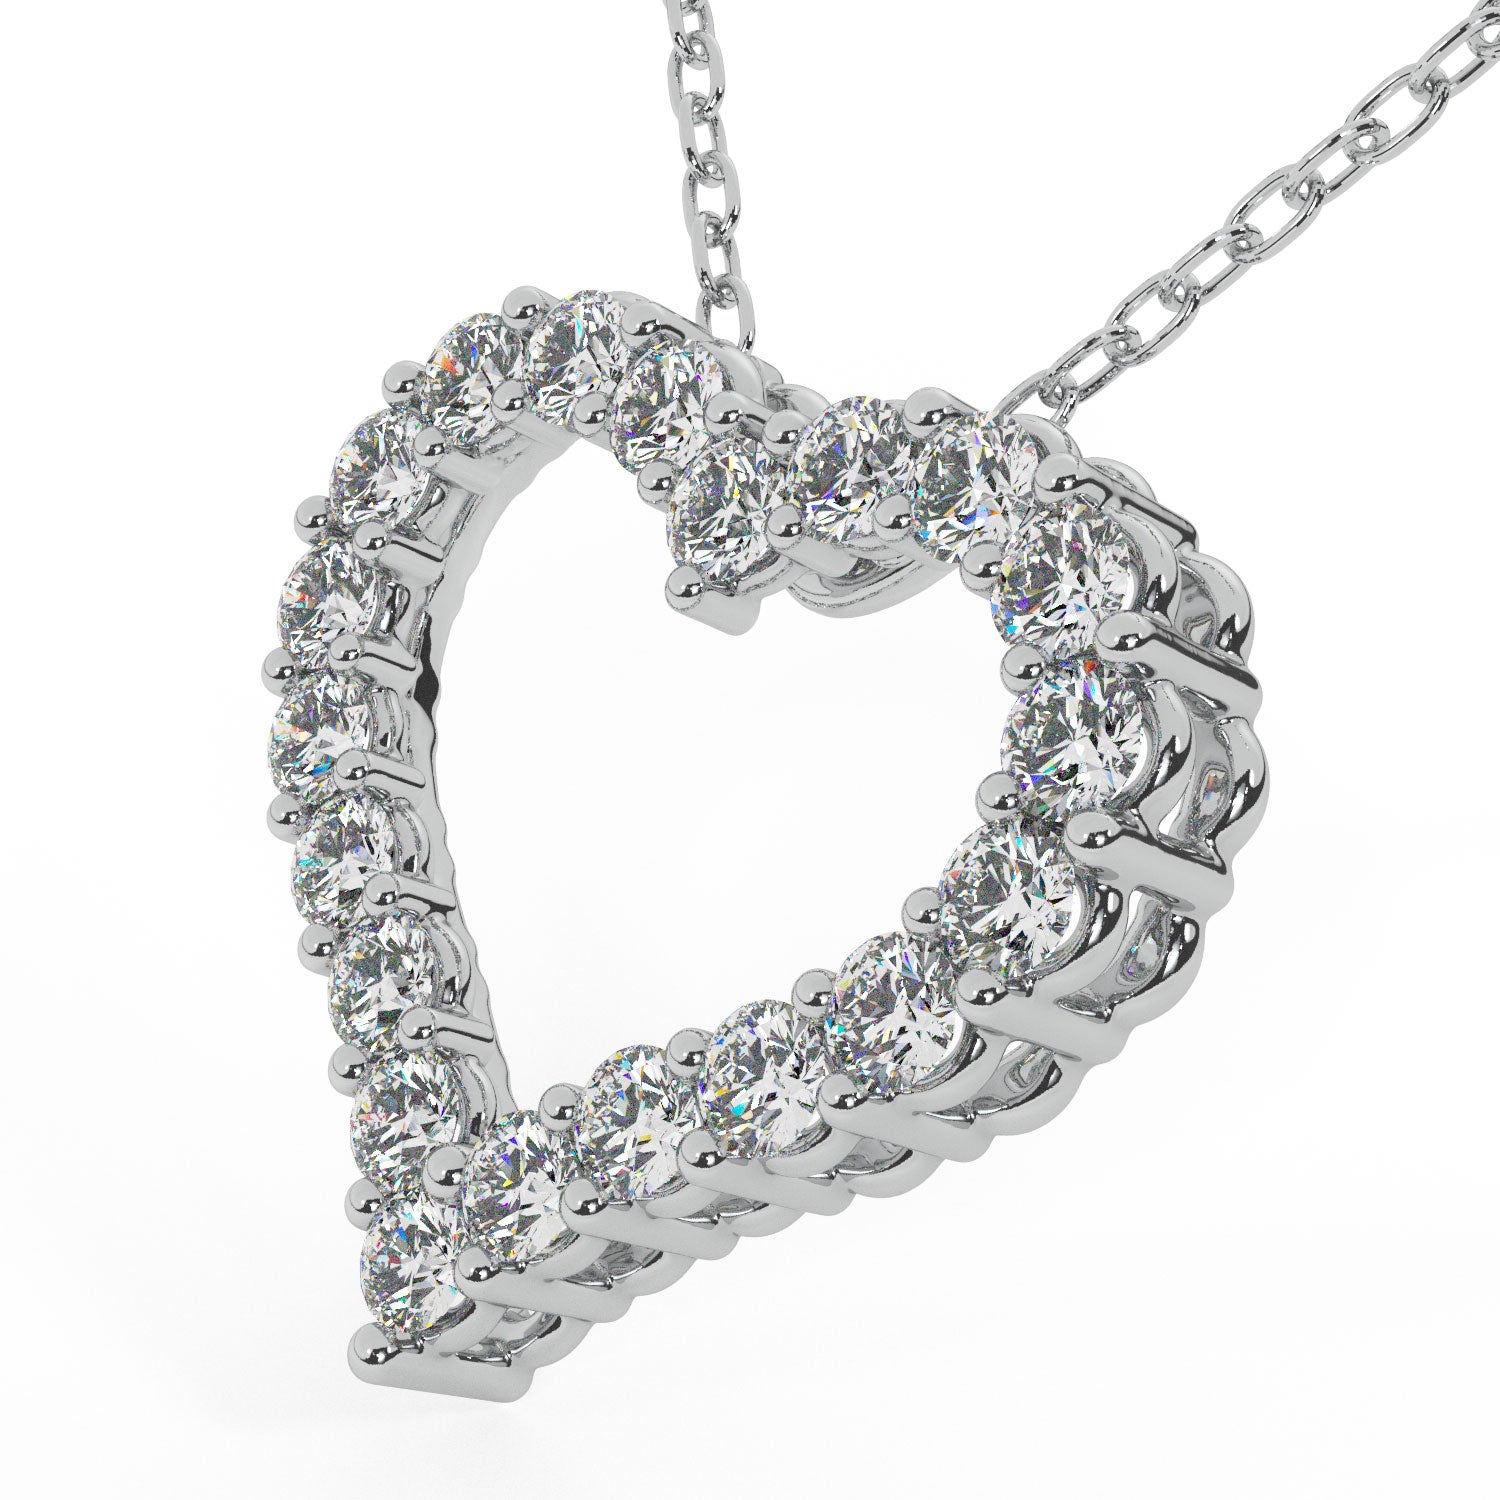 14K 1.00 Ct Coveted Heart Pendant